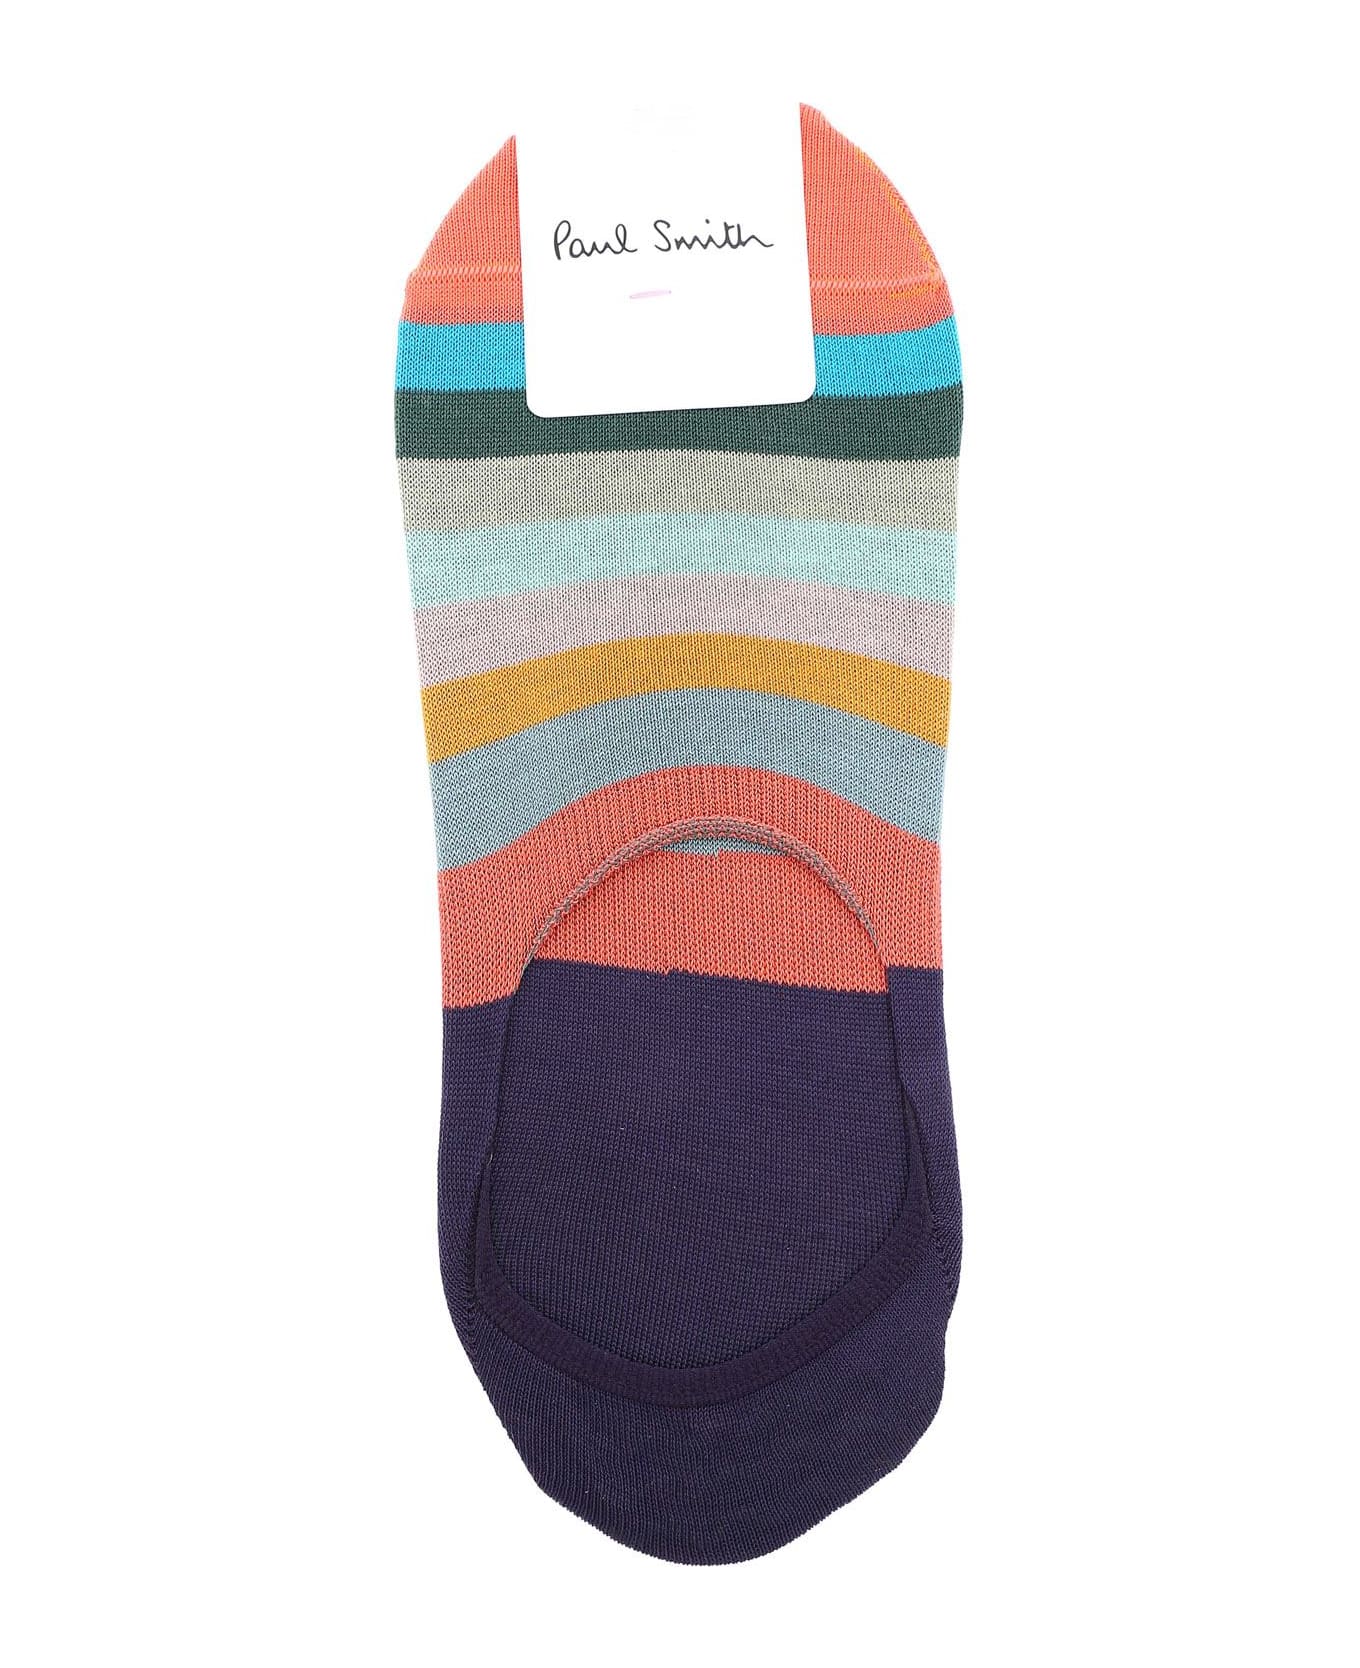 Paul Smith Foot Safety - Multicolor